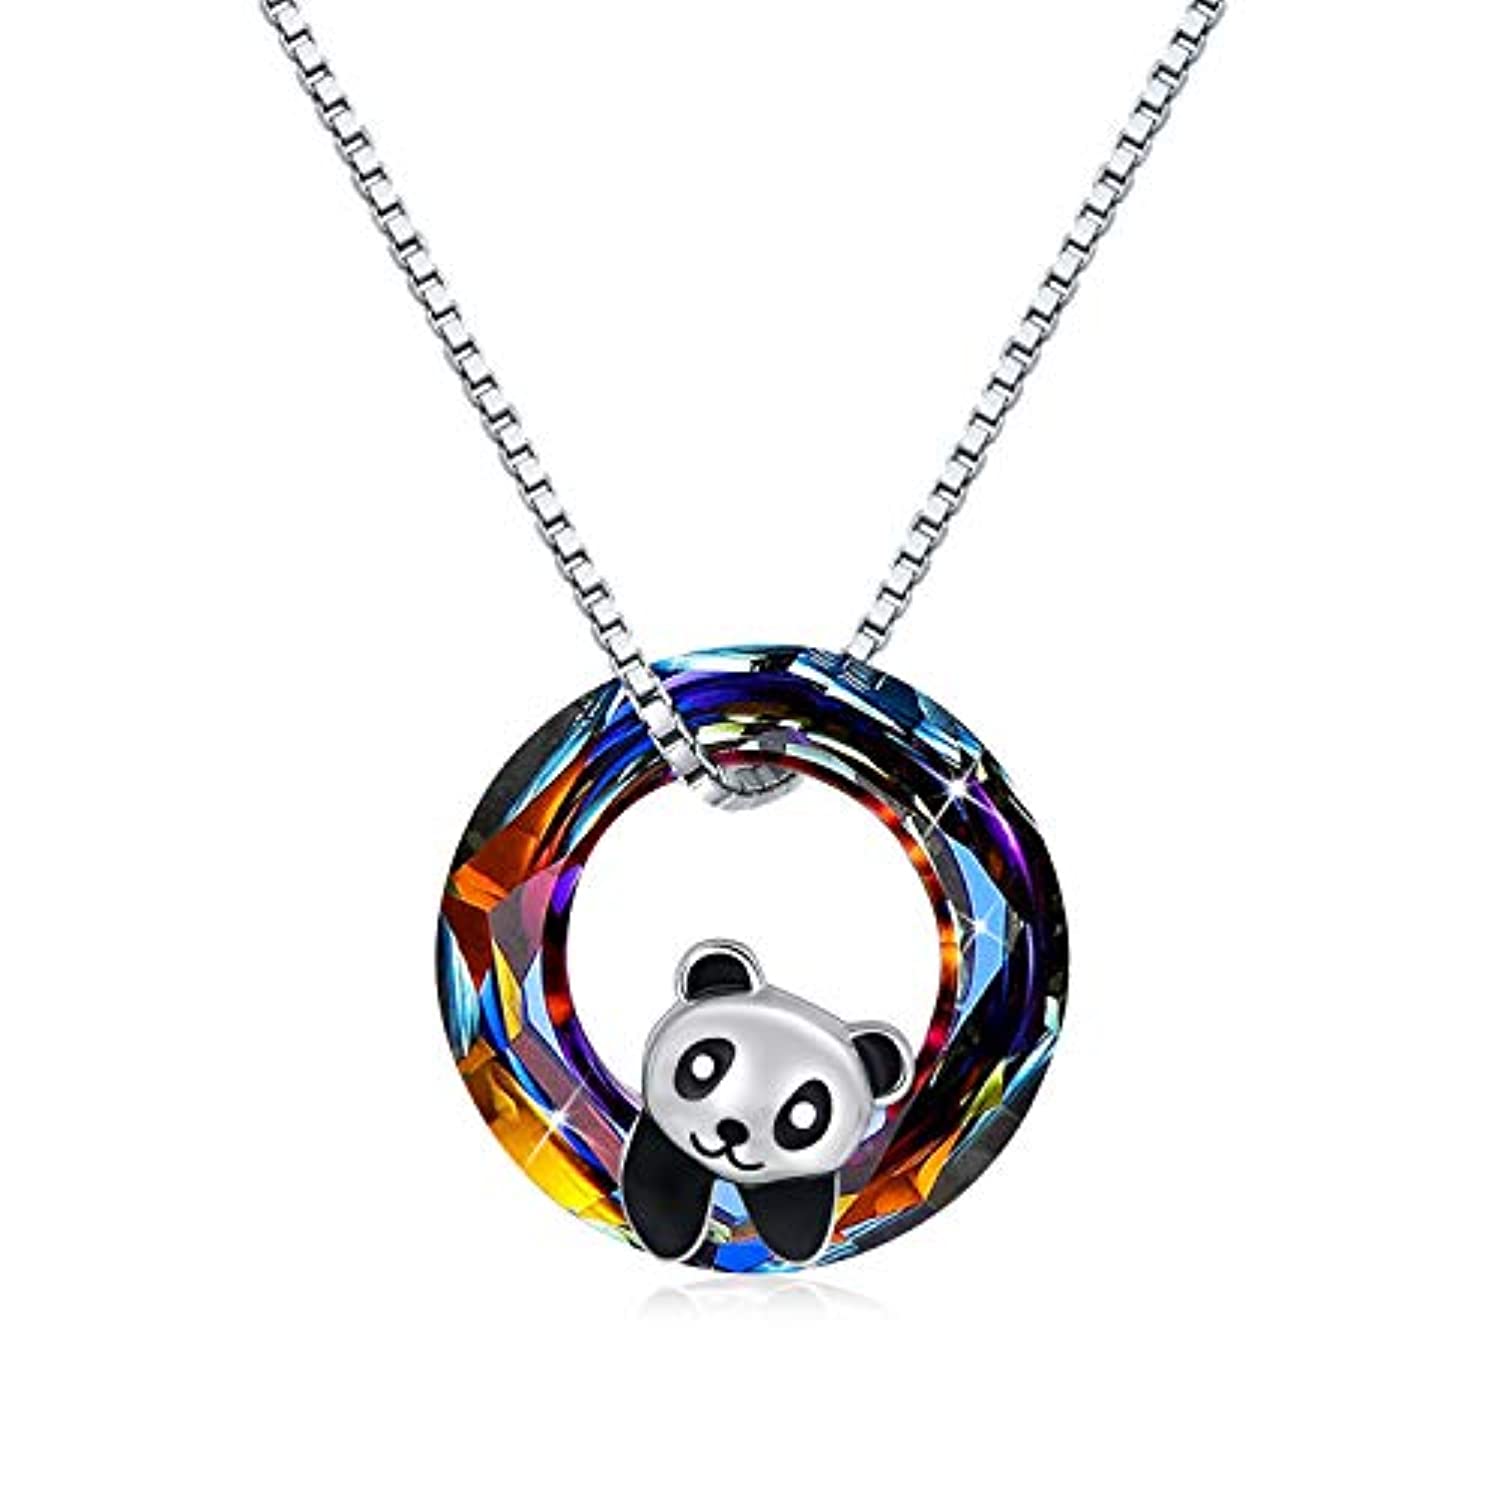 Panda Gold Necklace - Womens Chain Necklace 18K